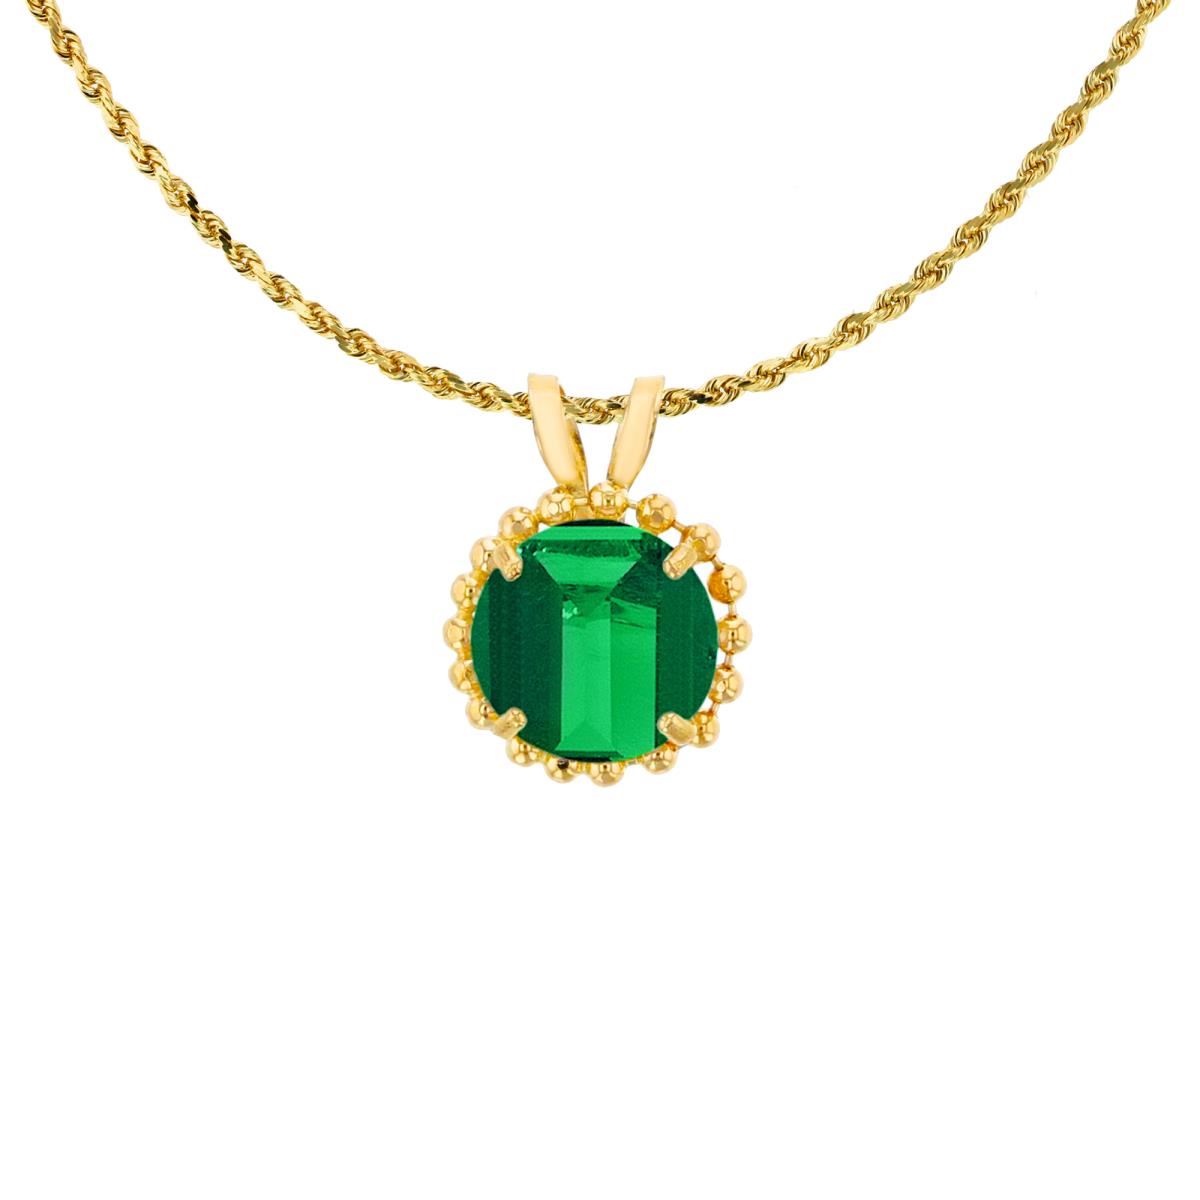 10K Yellow Gold 6mm Rd Cut Created Emerald with Bead Frame Rabbit Ear 18" Necklace